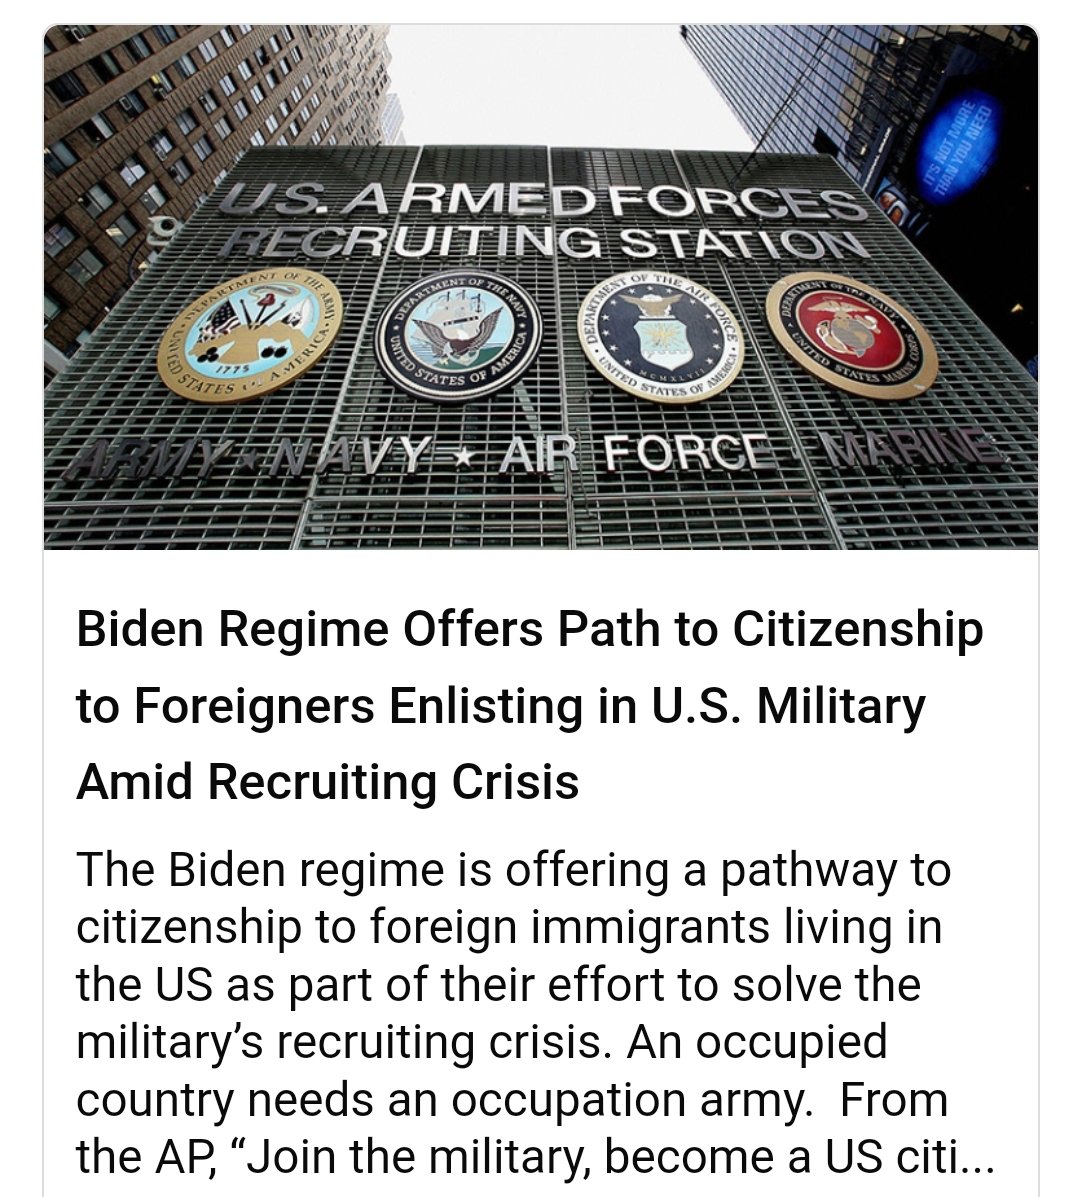 If you ever believed that an all-voluntary military force was incapable of turning against it's own citizens, think again. An illegal wouldn't hesitate putting a bullet in my head or yours in exchange for citizenship.